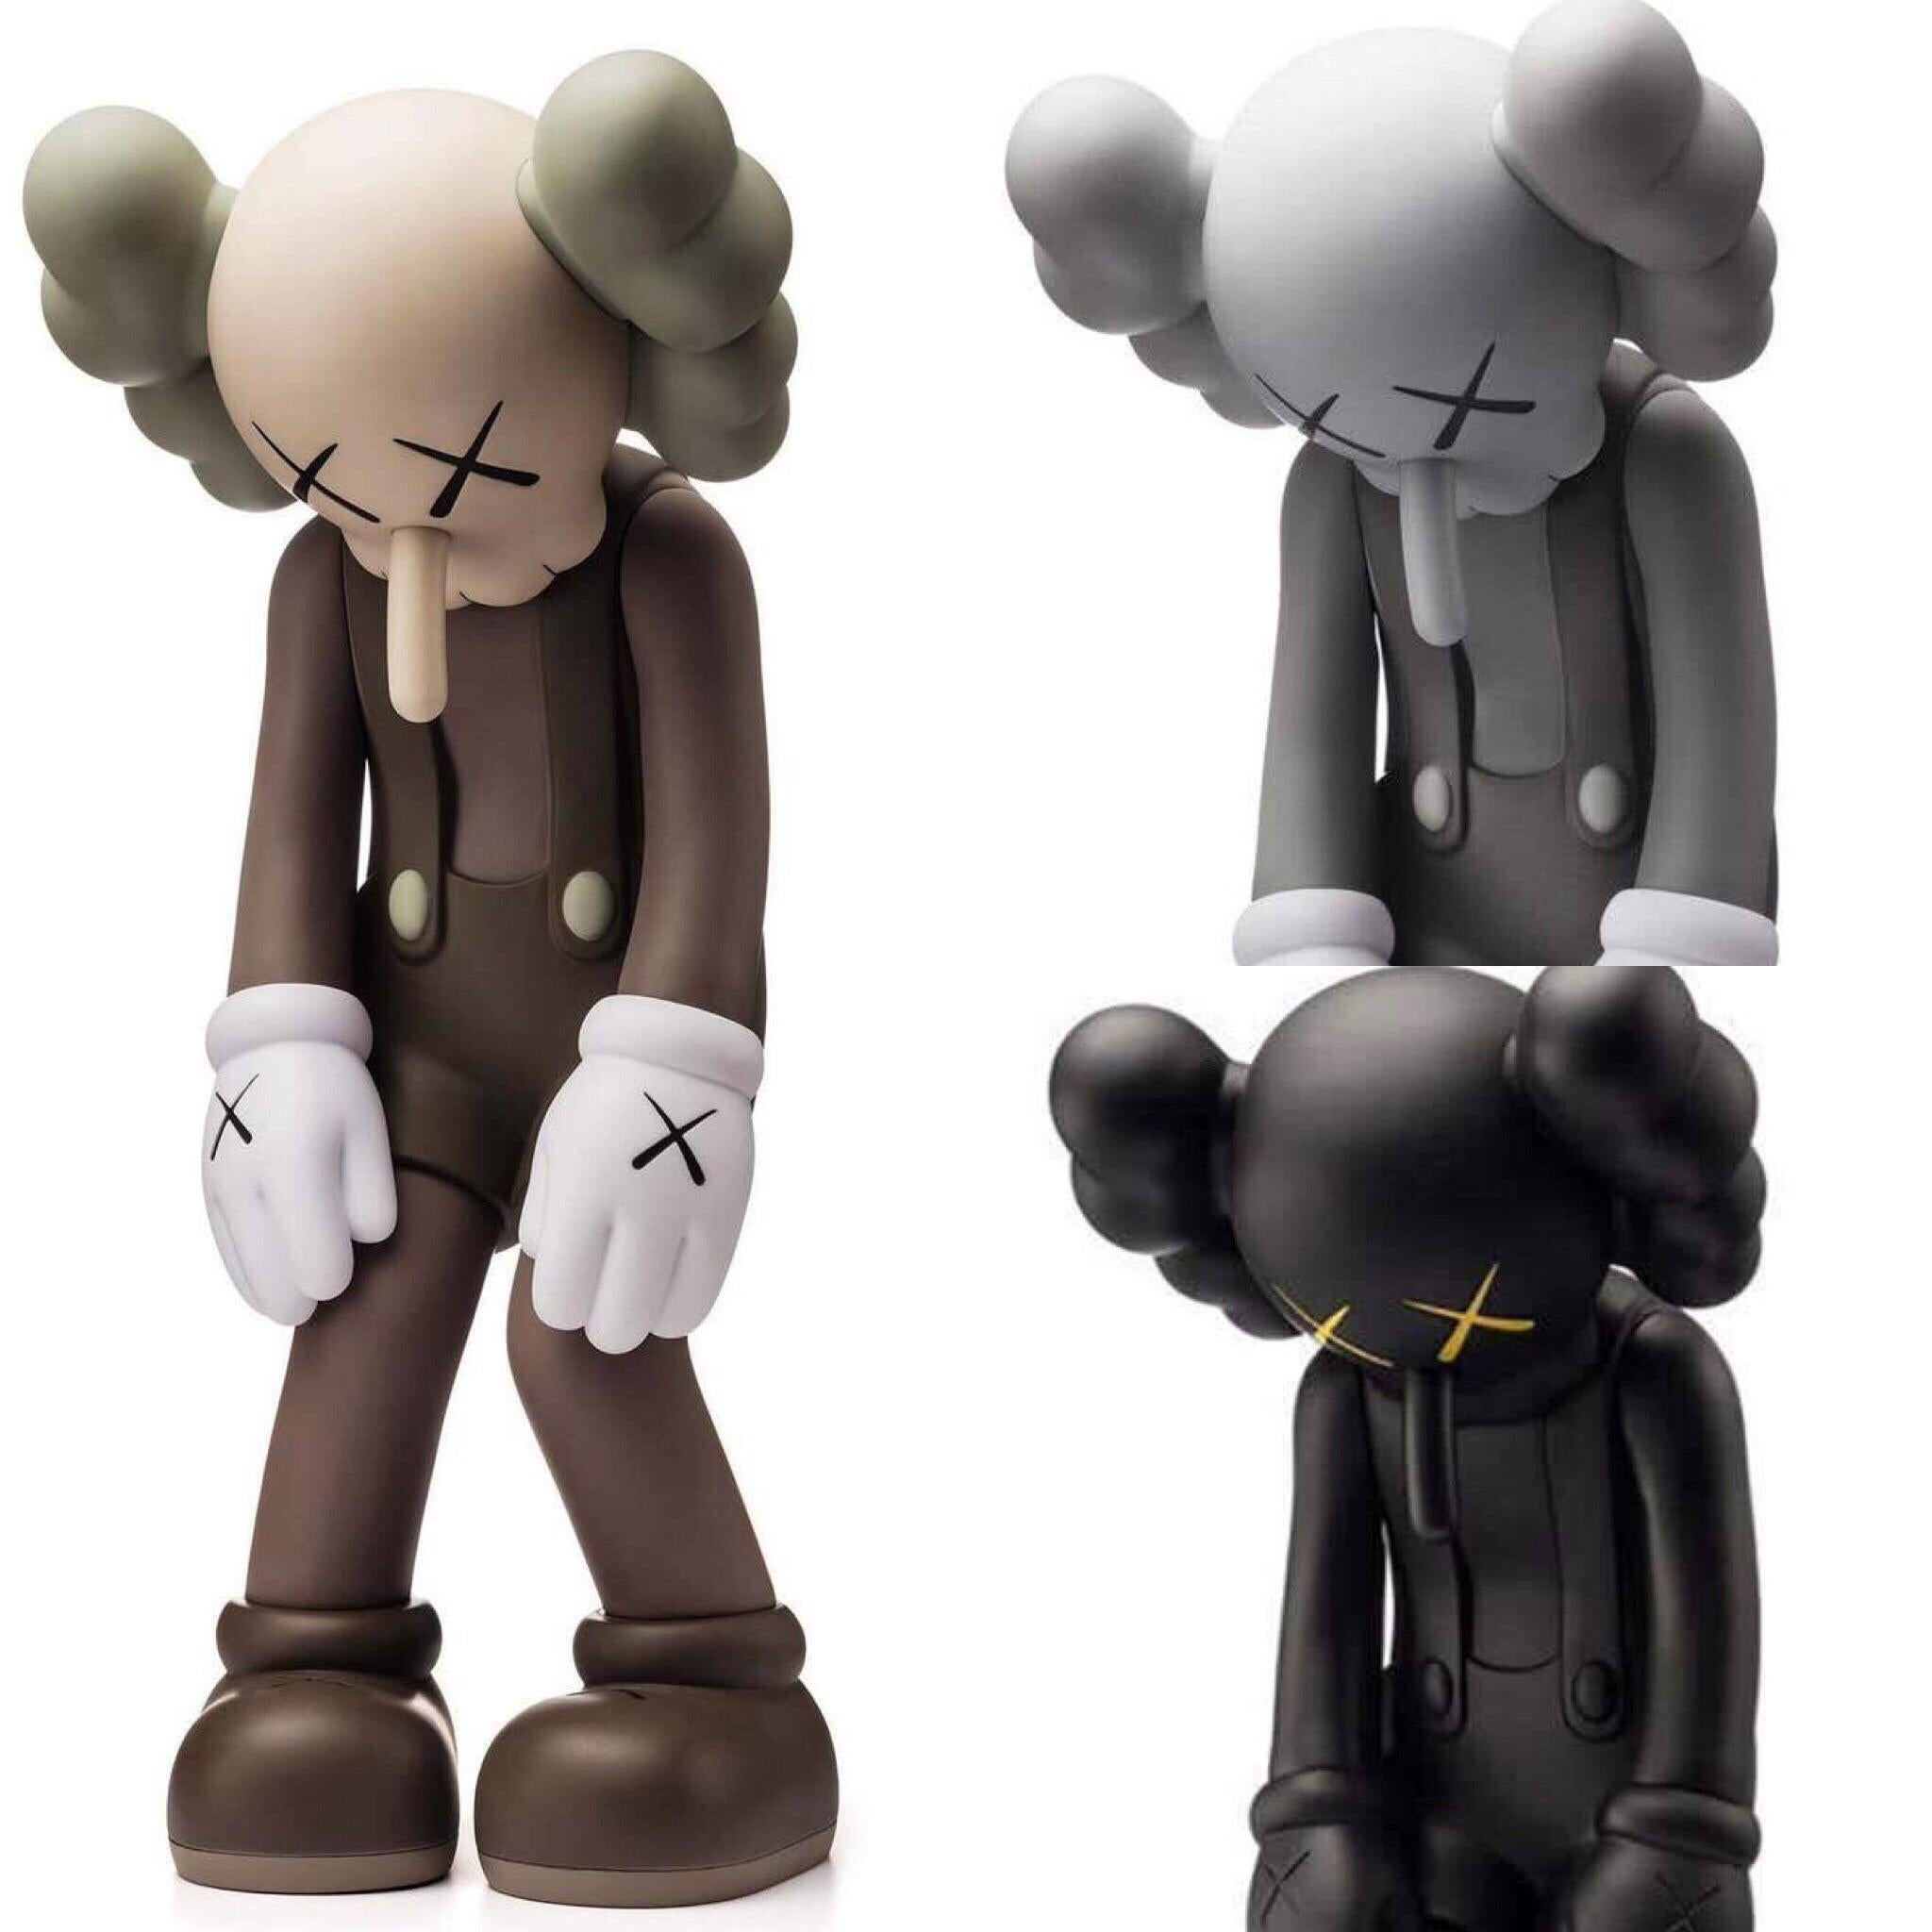 KAWS SMALL LIE: Complete Set of Three. Each new and sealed in their original packaging. These KAWS figurative pieces are a rendition of Small Lie produced in collaboration with Qatar Museums, a 30-feet-tall sculpture constructed out of African